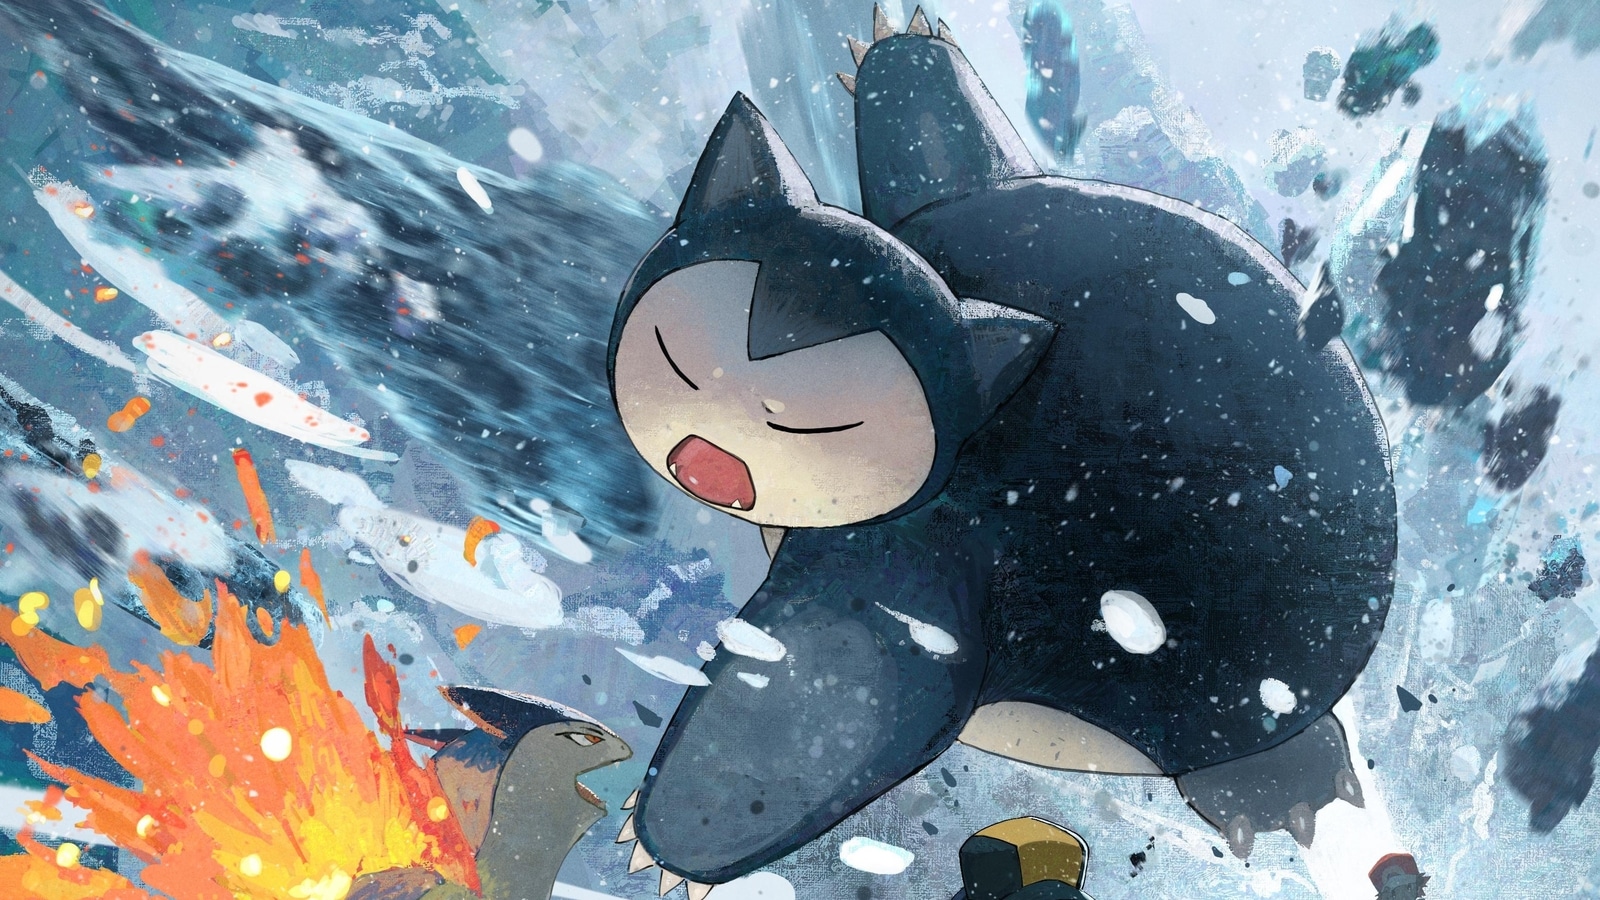 Missing Snorlax? Pokemon announces a new manga all about your favourite Pokemon